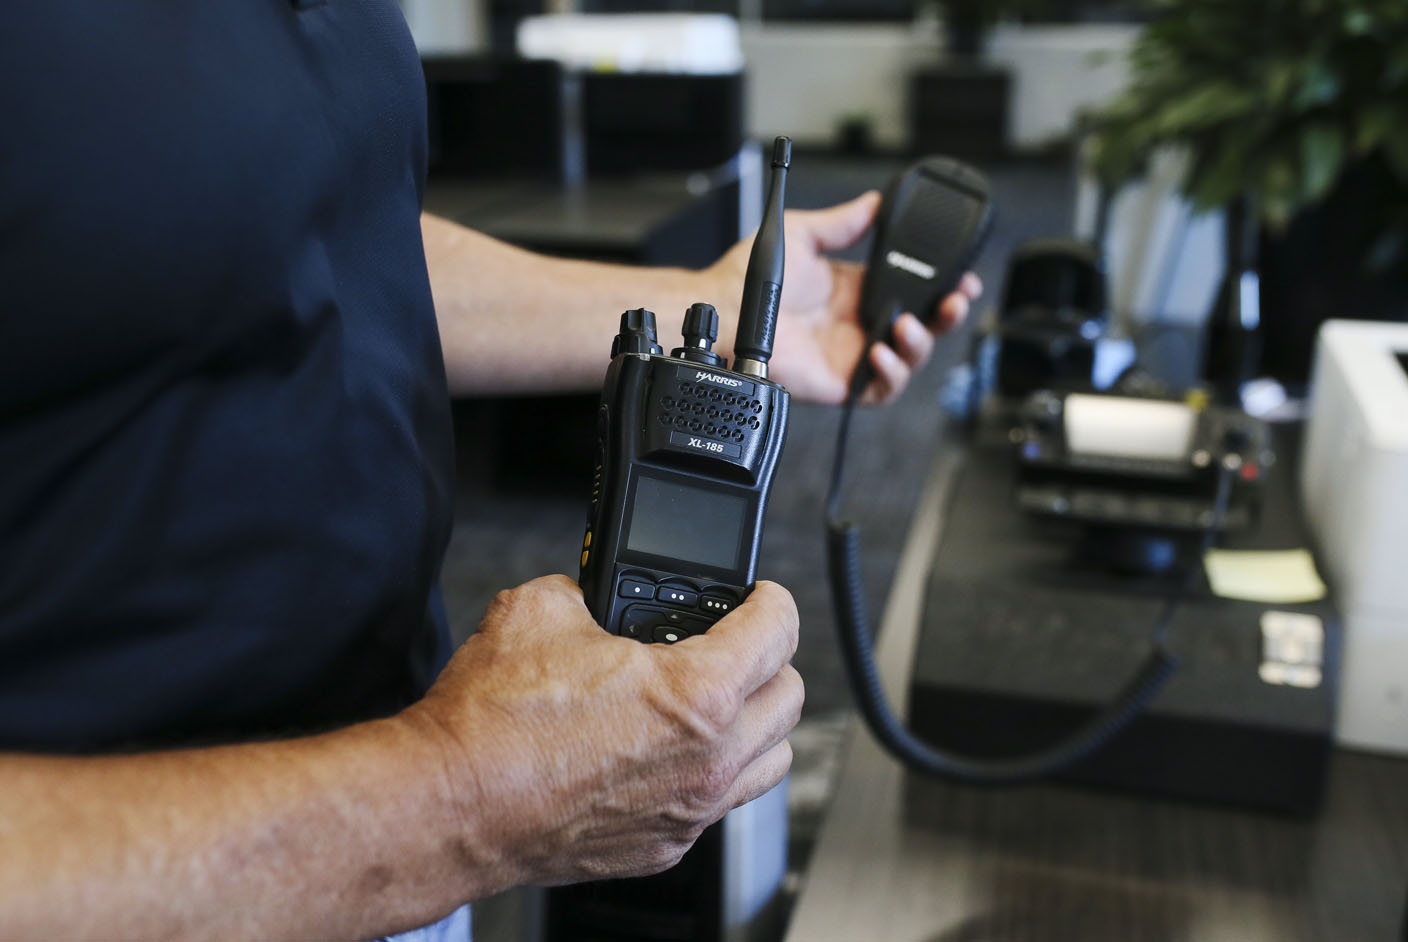 Bentonville’s plan for radio device being fine-tuned